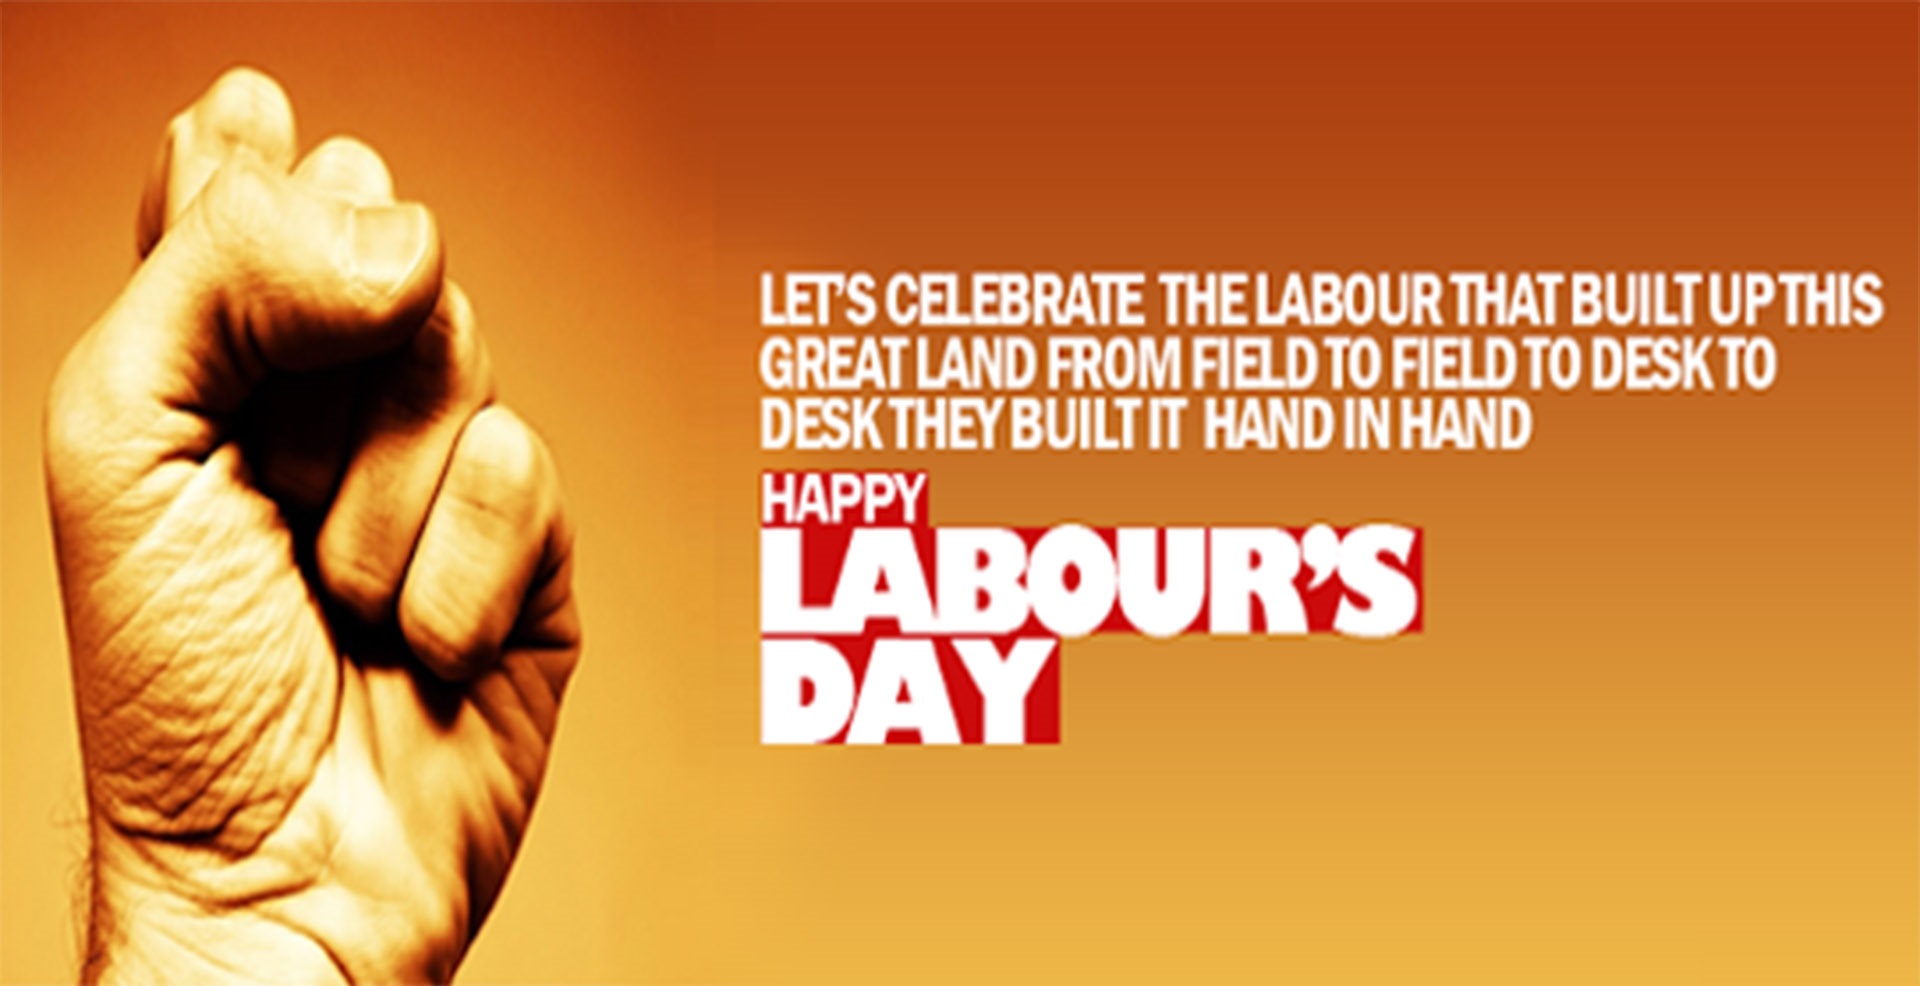 happy labour day 2018 image